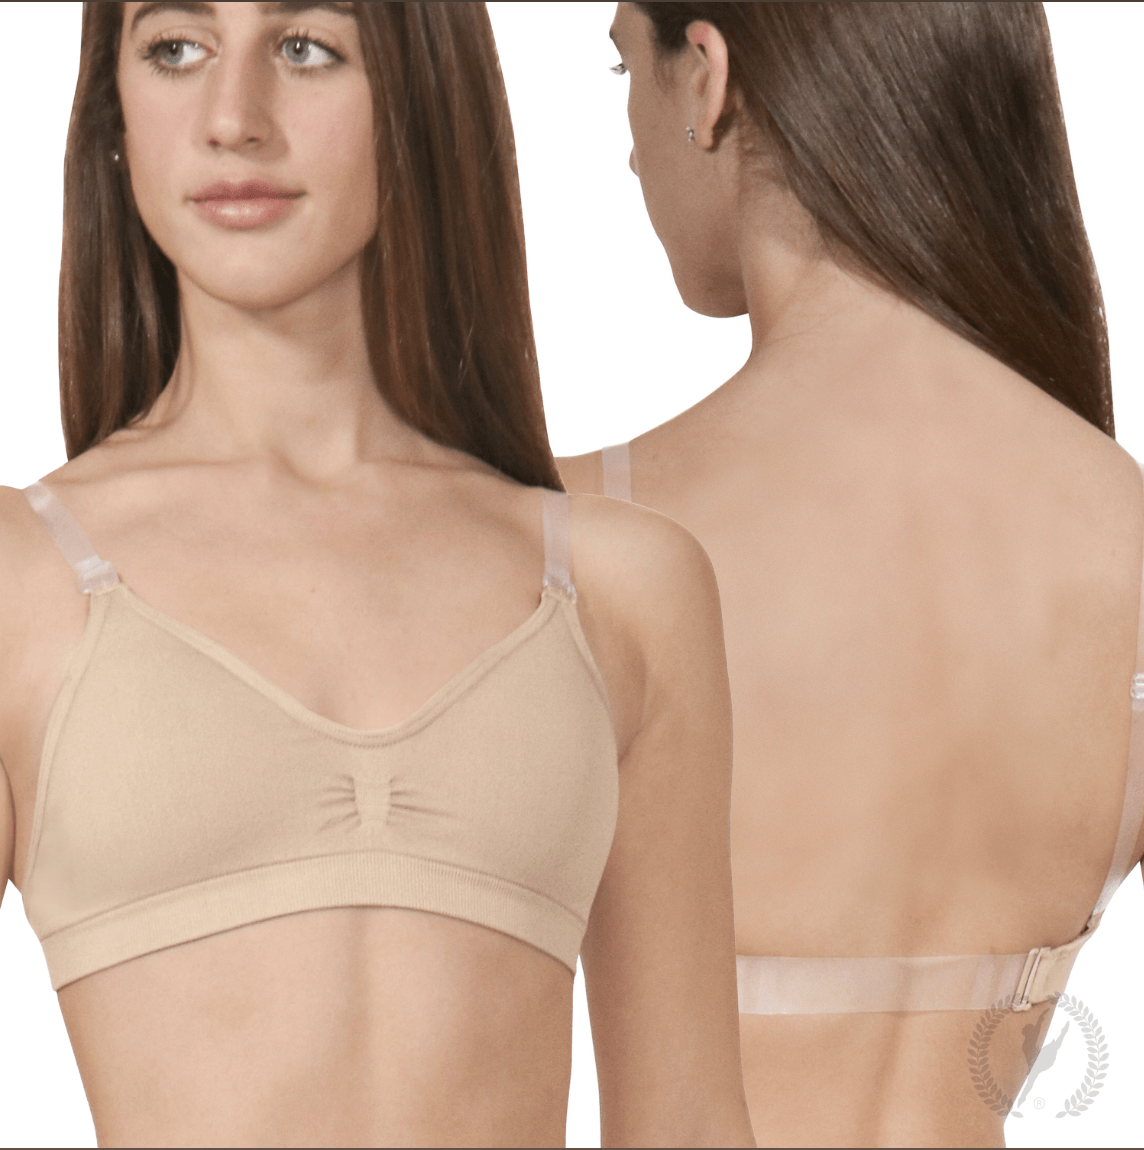 BODY WRAPPERS UNDERWRAPS PADDED CLEAR BACK BRA - ADULT #287